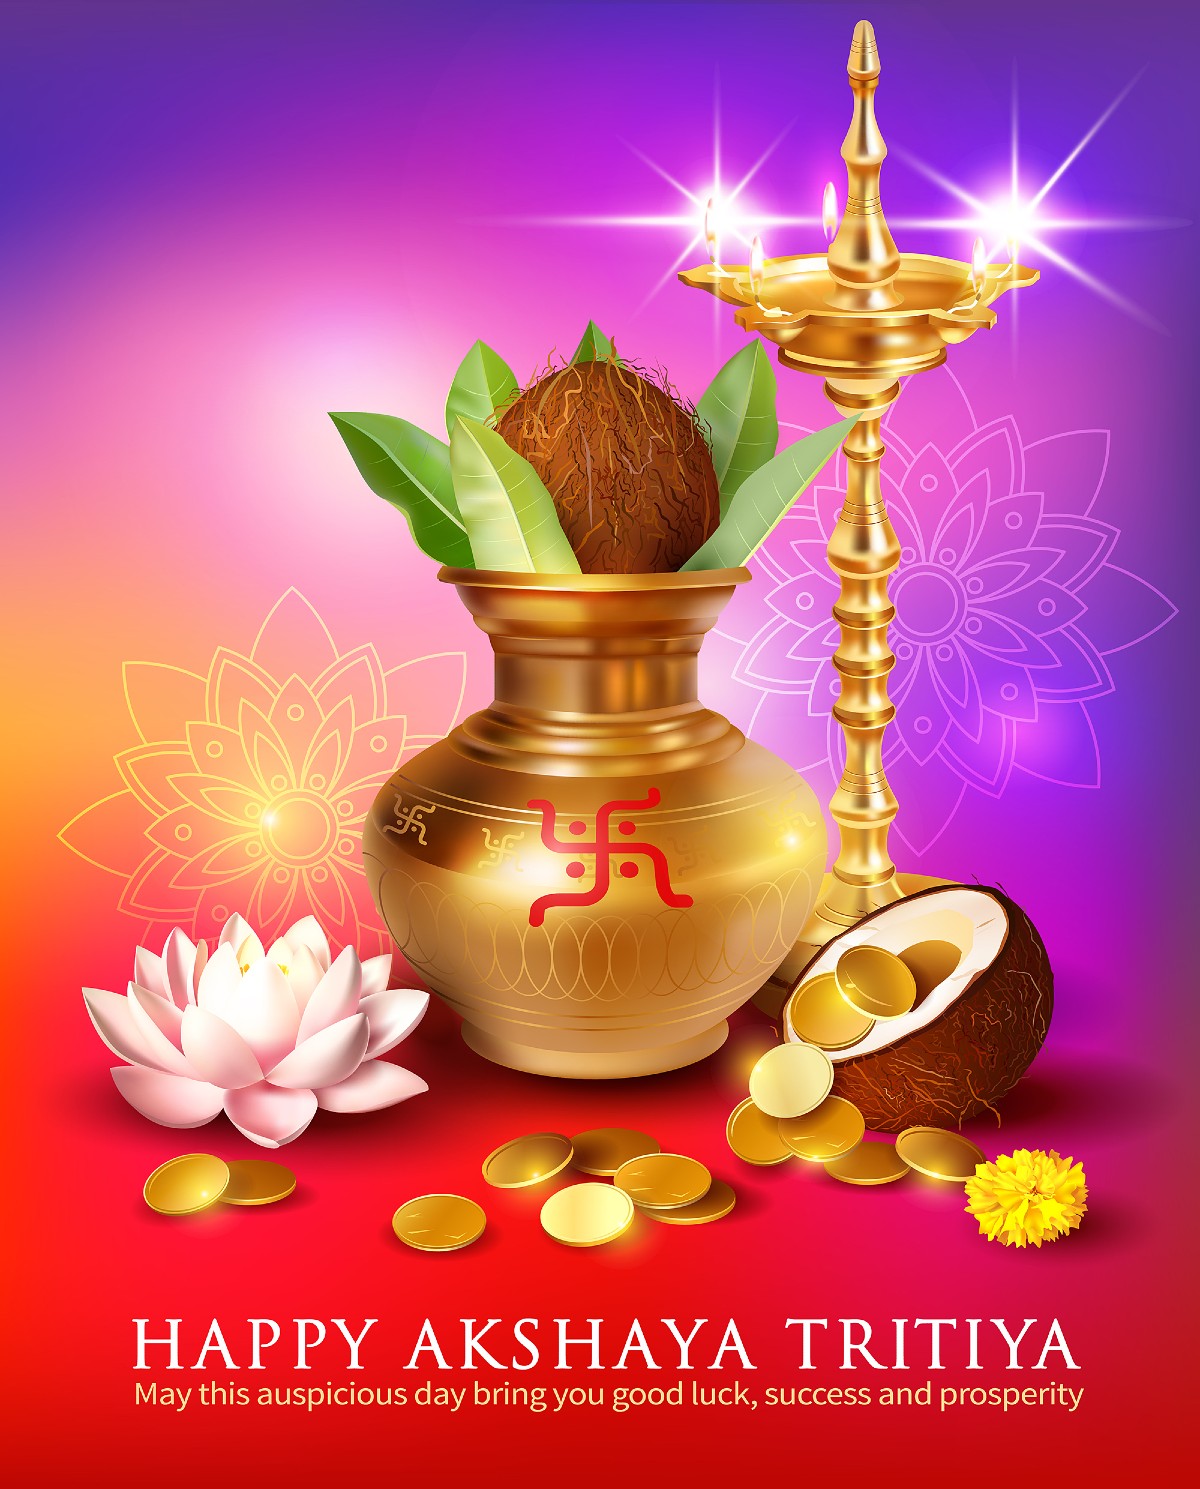 Happy Akshaya Tritiya 2022 Wishes, Images, Status, Quotes, Messages and WhatsApp Greetings to